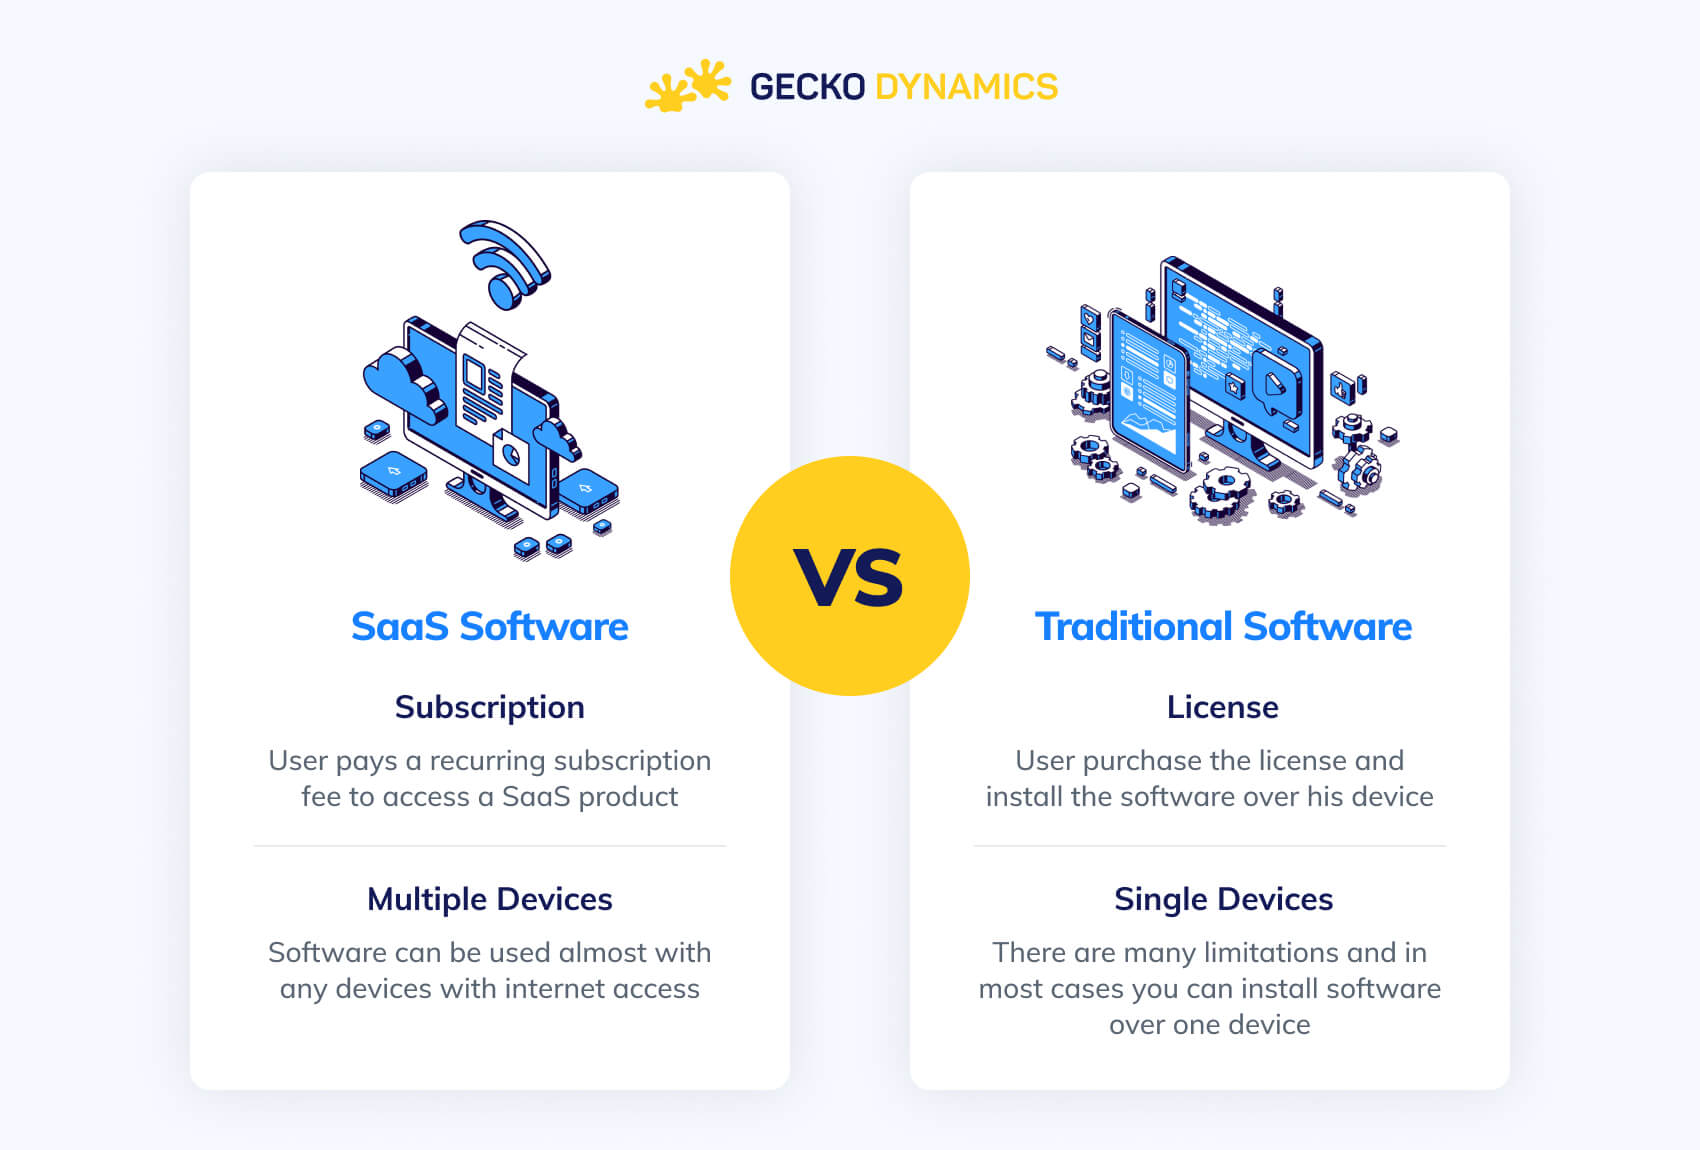 Saas vs Traditional software